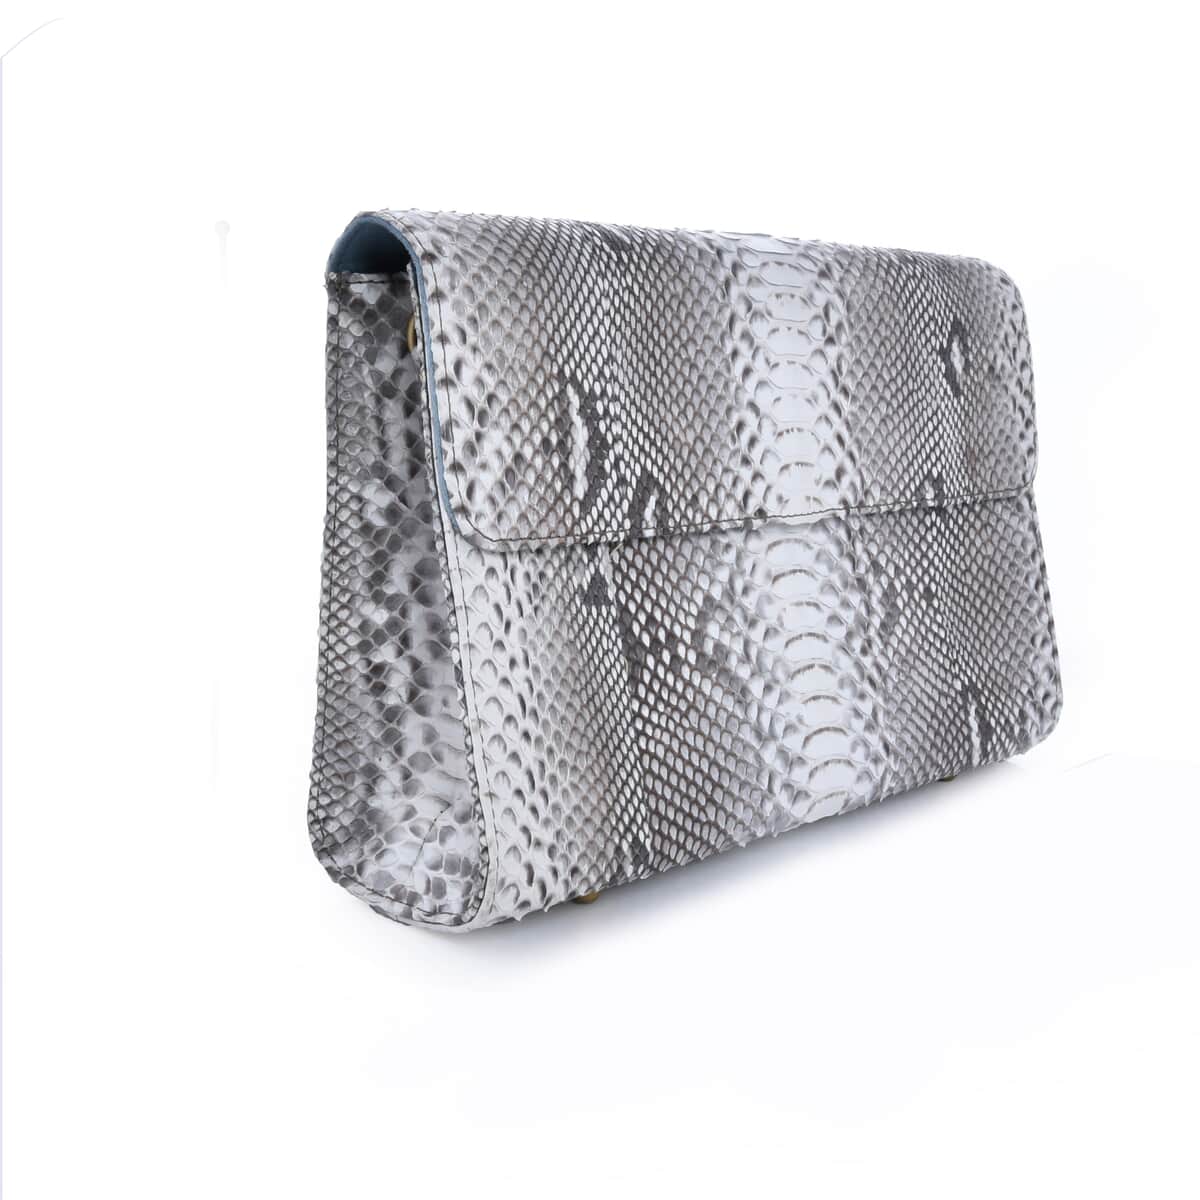 The Pelle Collection Natural Python Leather Evening Clutch Bag with Detachable Strap, Clutches for Women, Leather Handbag, Clutch Purse image number 3